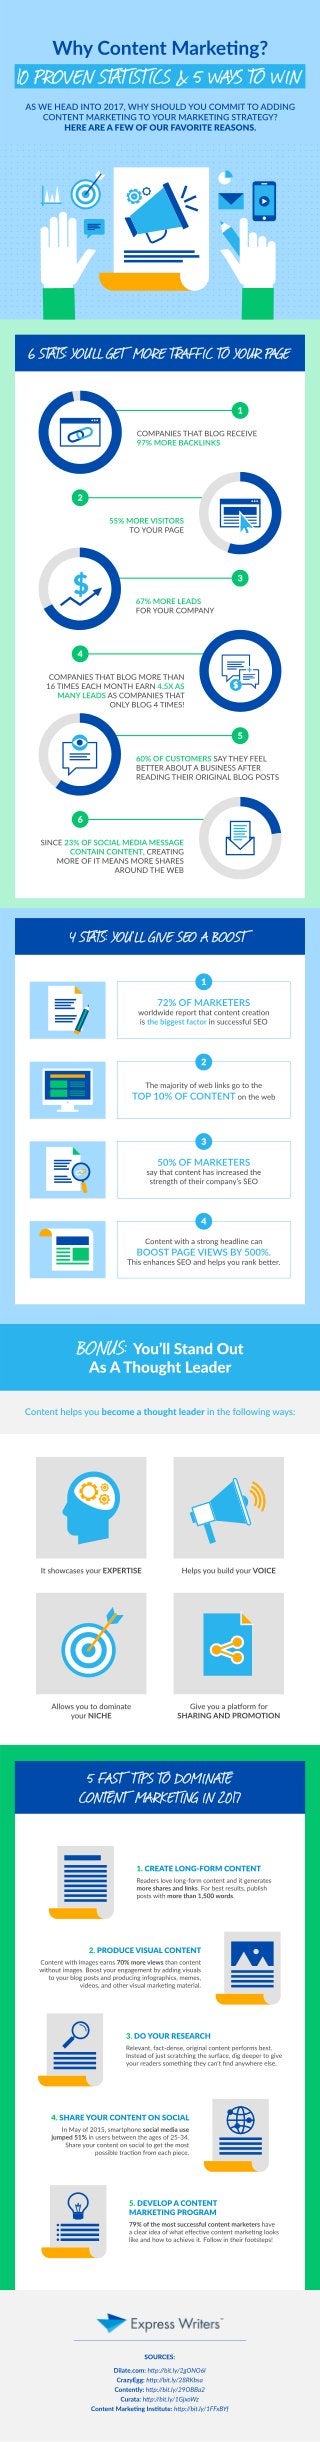 Why Content Marketing? 10 Proven Statistics & 5 Ways to Win (Infographic)